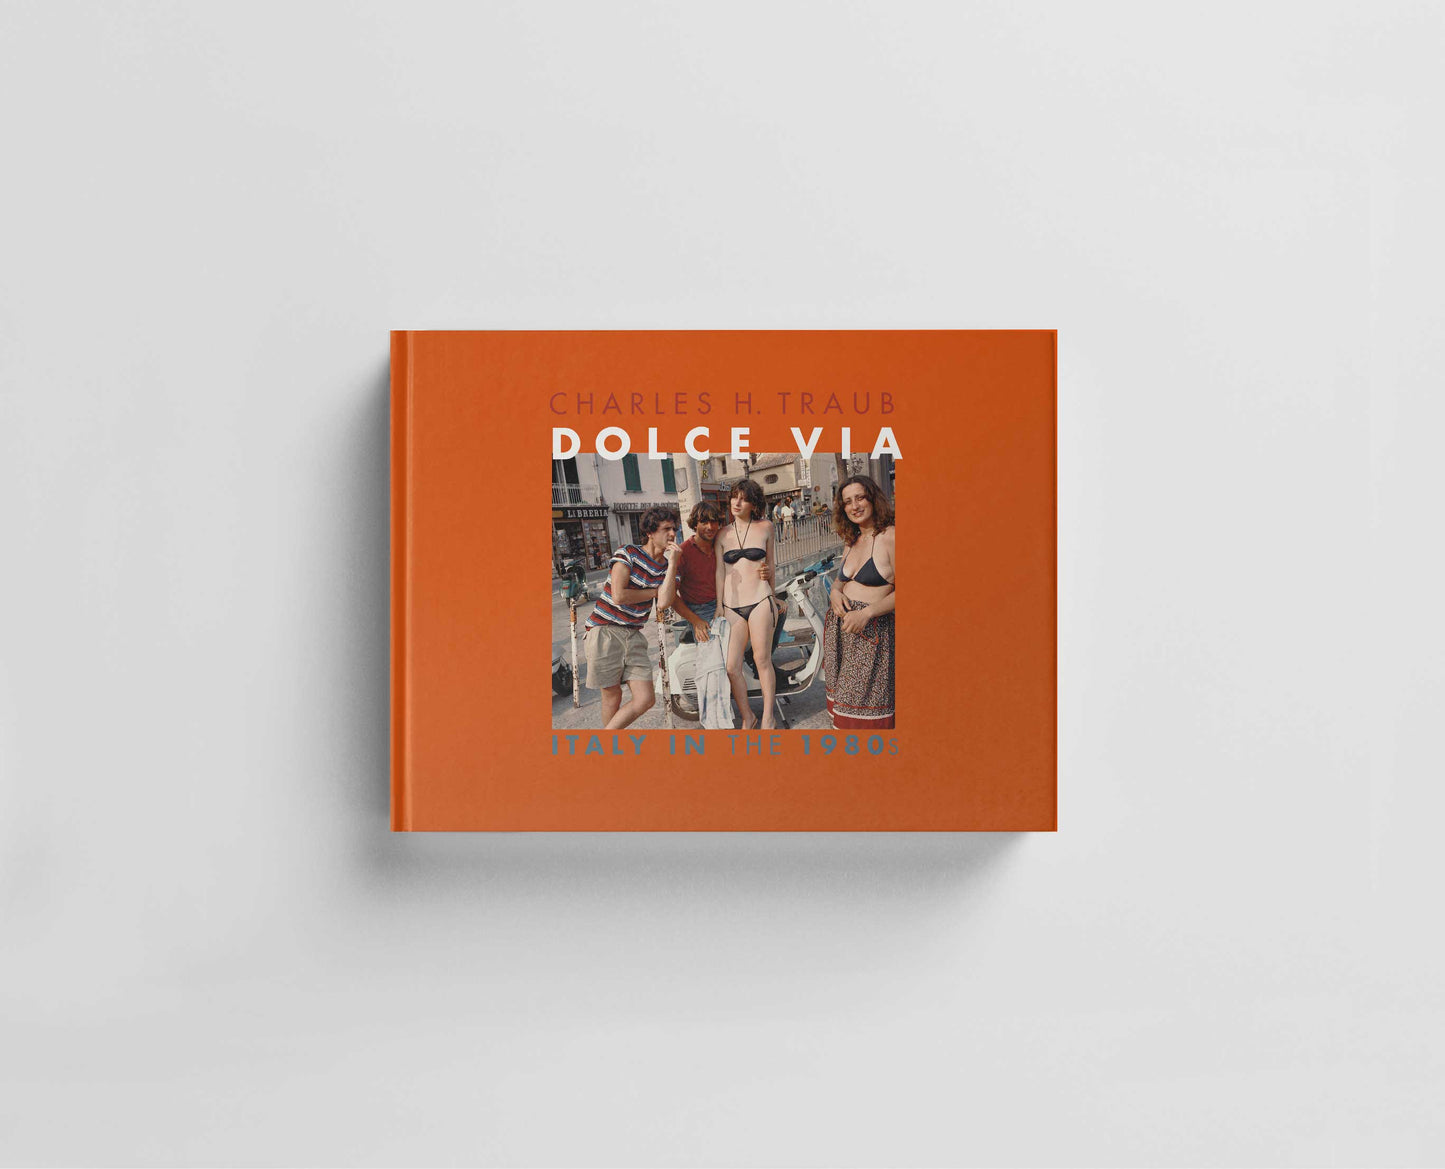 Dolce Via. Italy in the 1980s Default Title